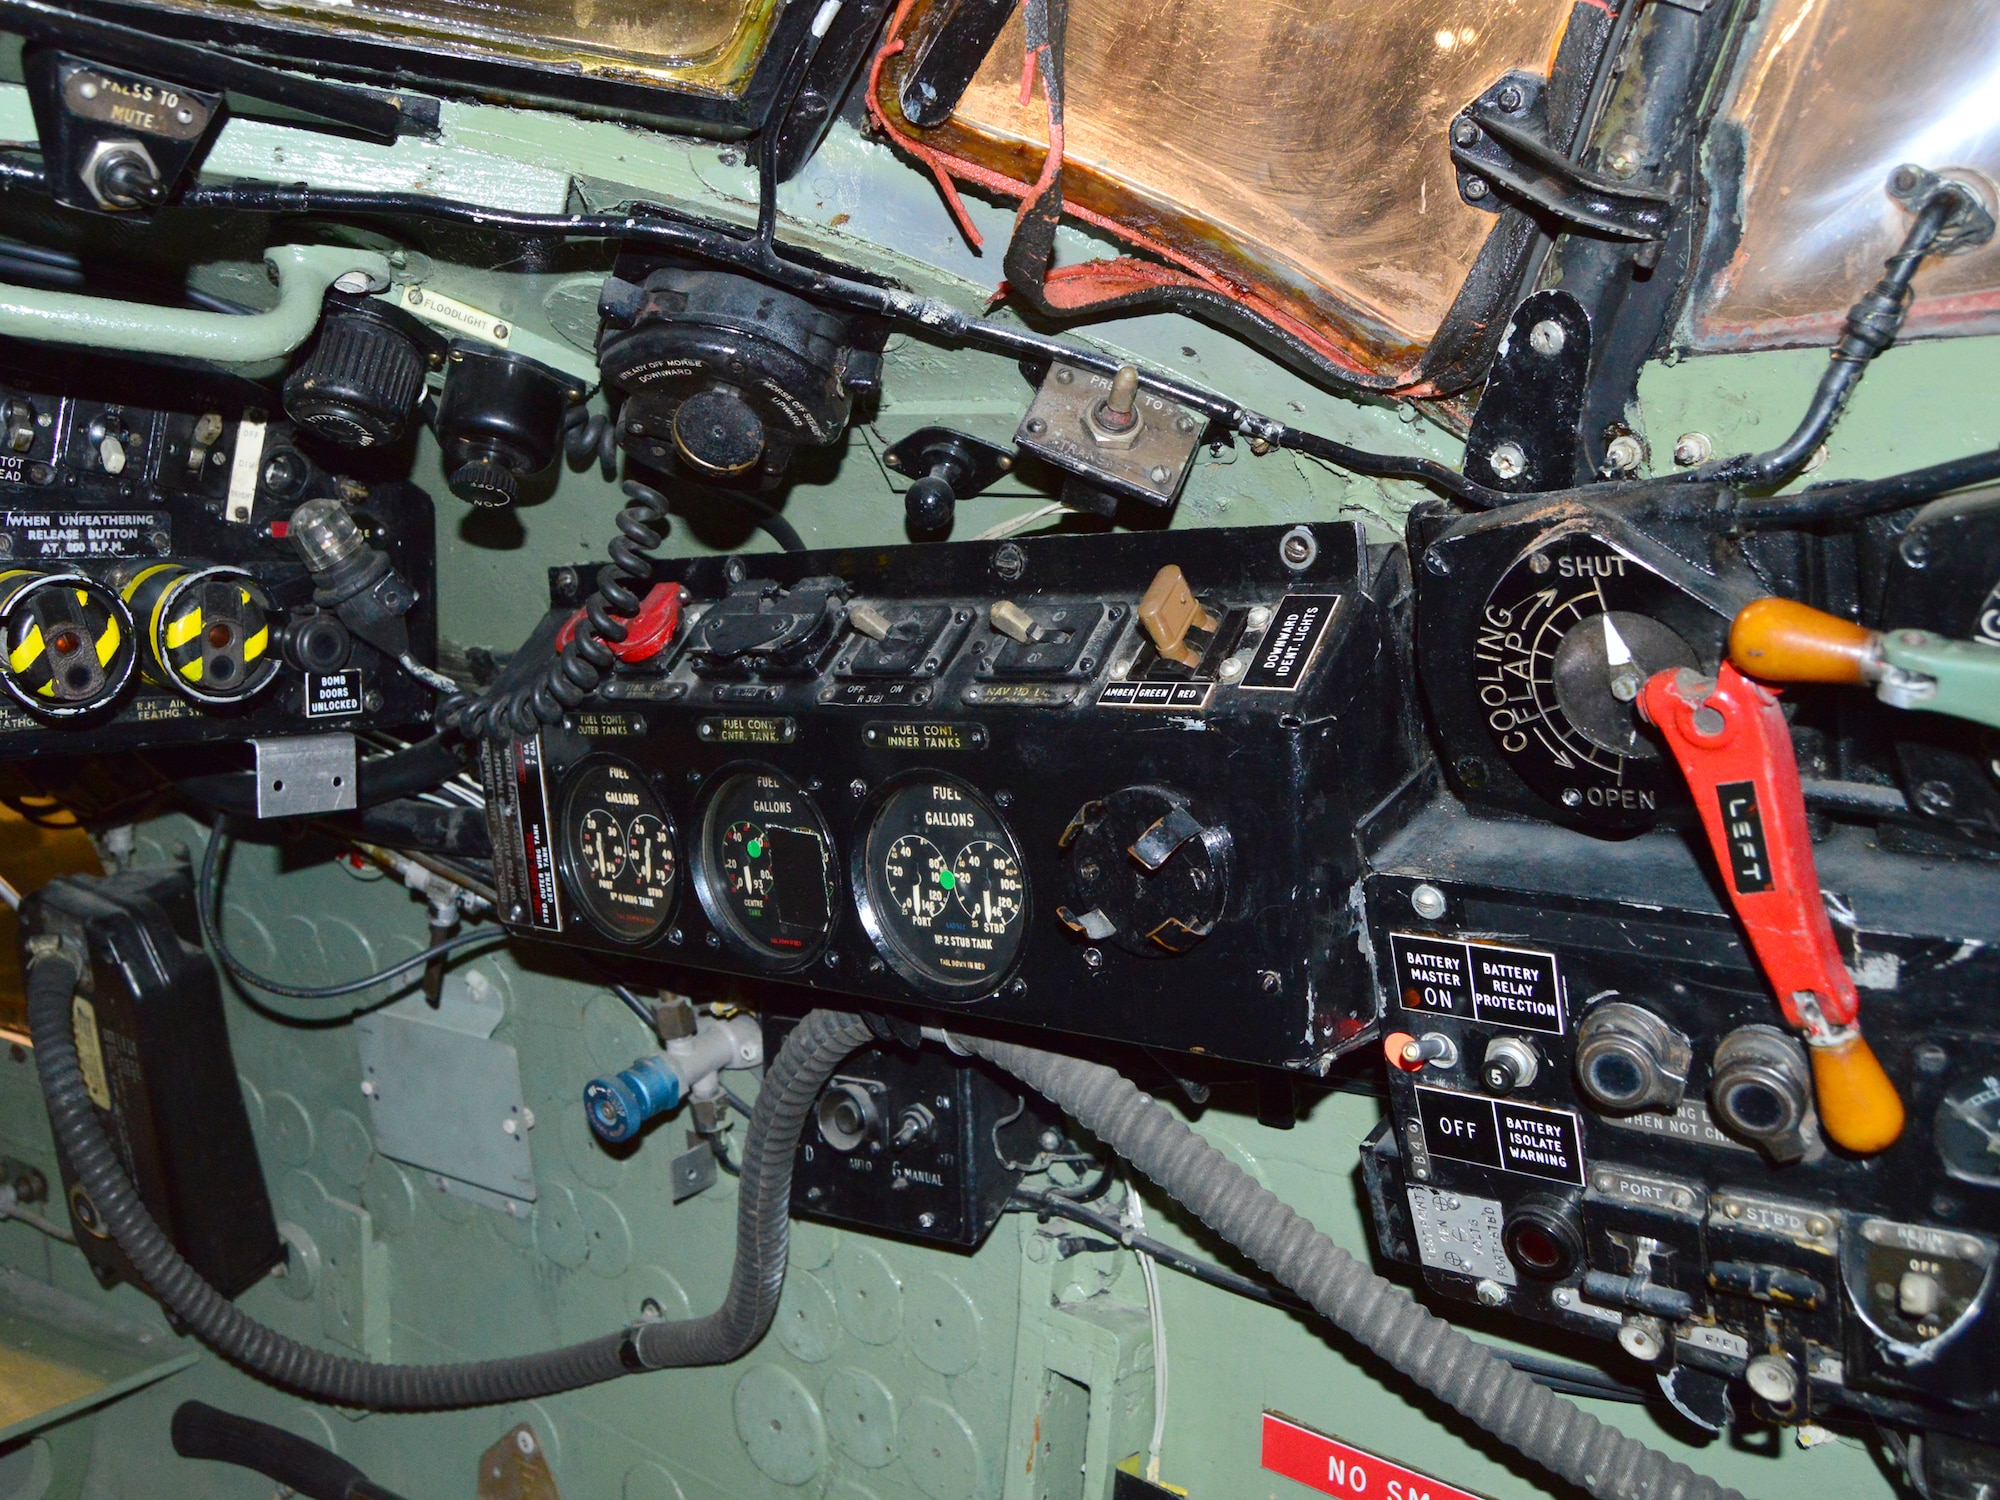 DAYTON, Ohio - De Havilland DH 98 cockpit in the WWII Gallery at the National Museum of the U.S. Air Force. (U.S. Air Force photo by Ken LaRock)